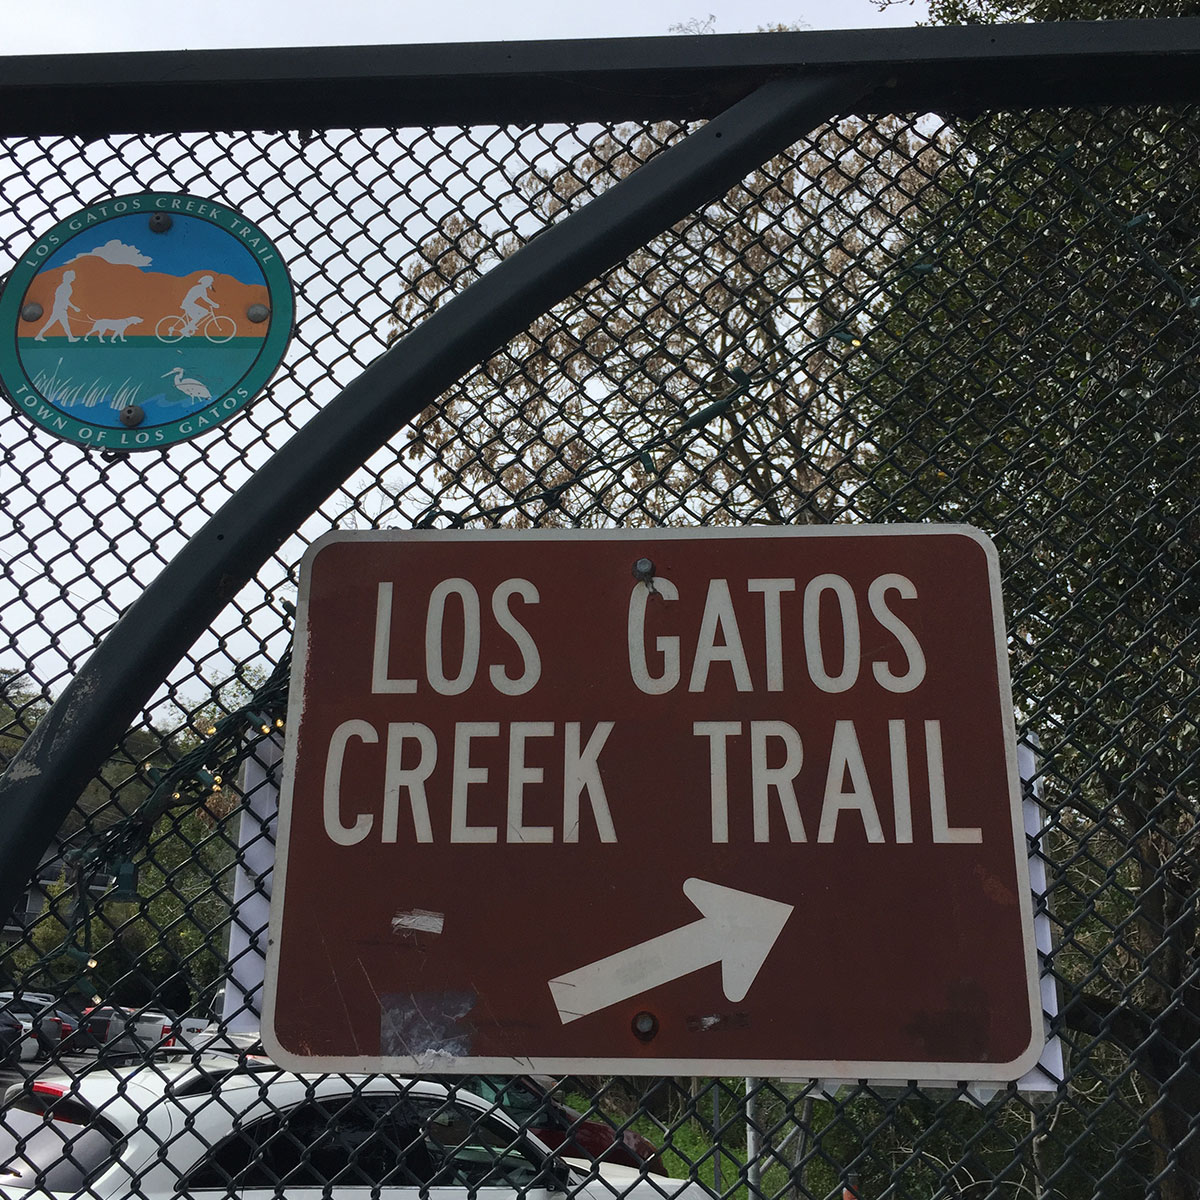 Things to do in Los Gatos/Creek Trail